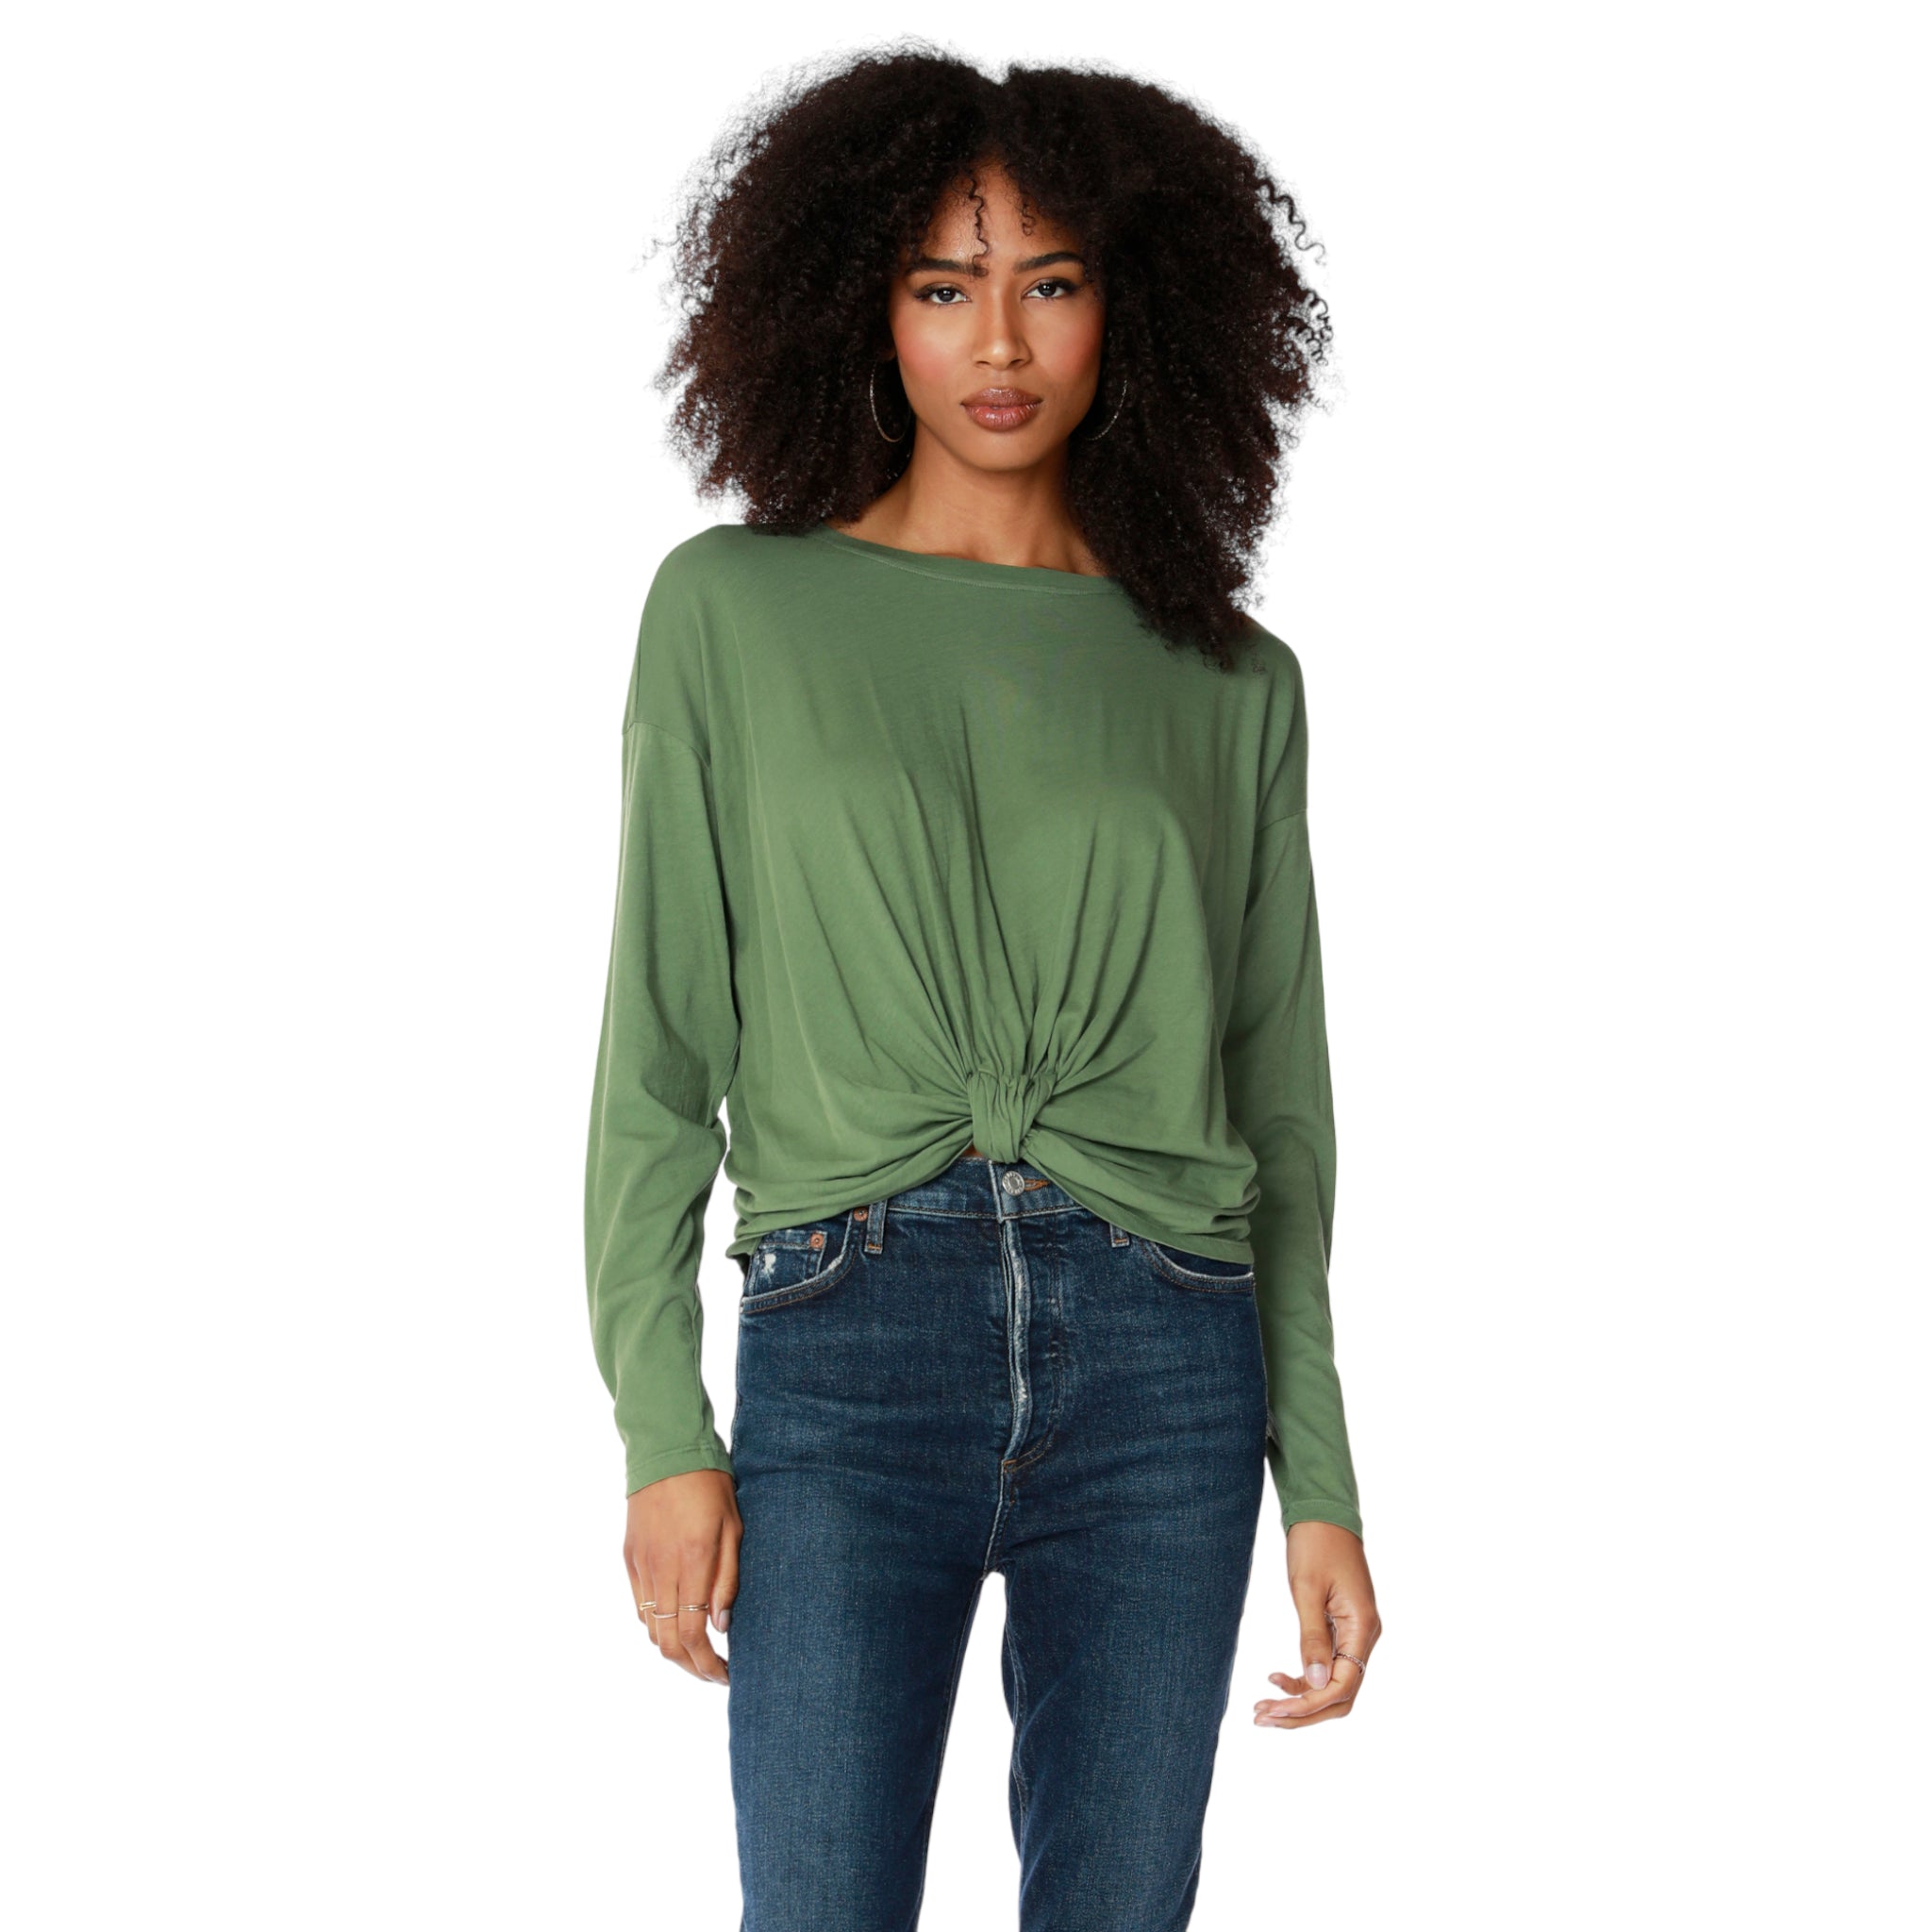 Knot Front Detail Long Sleeve Top in Sprout-Veri Peri